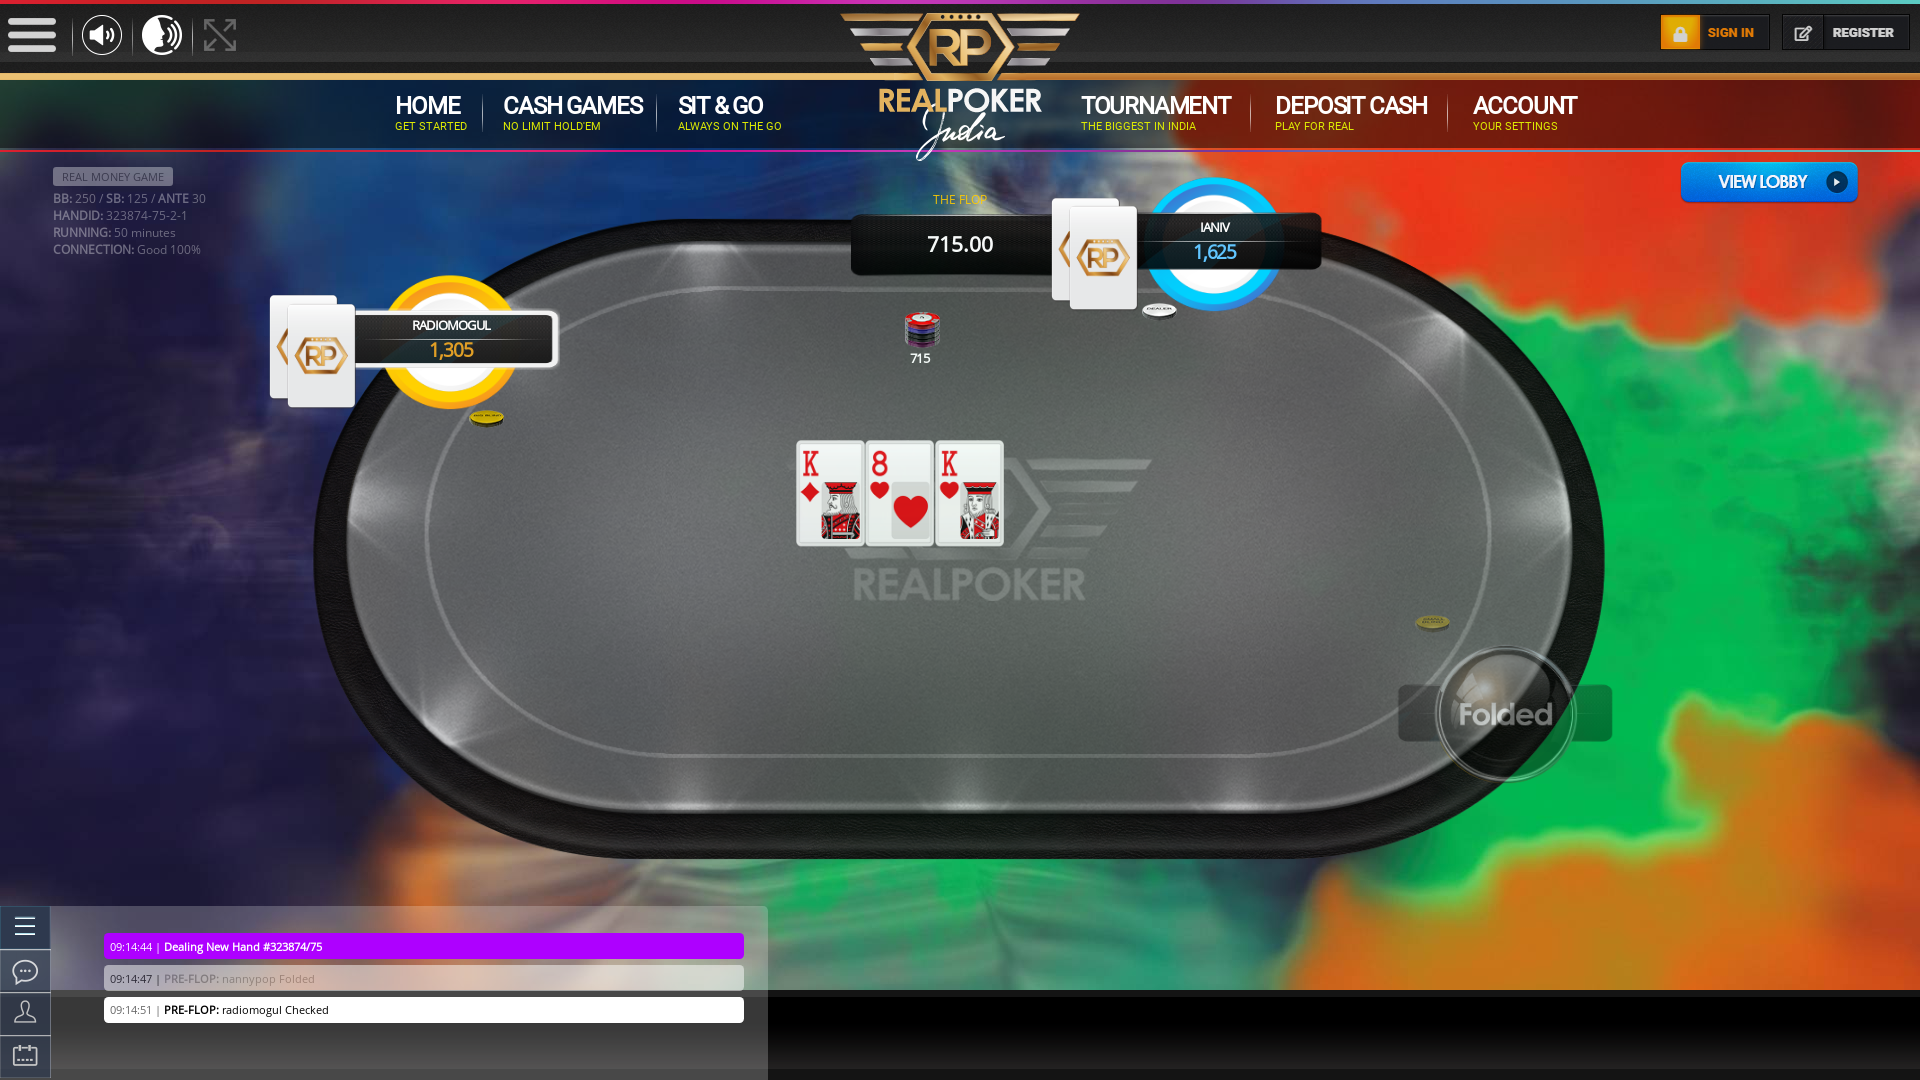 Indian online poker on a 10 player table in the 50th minute match up